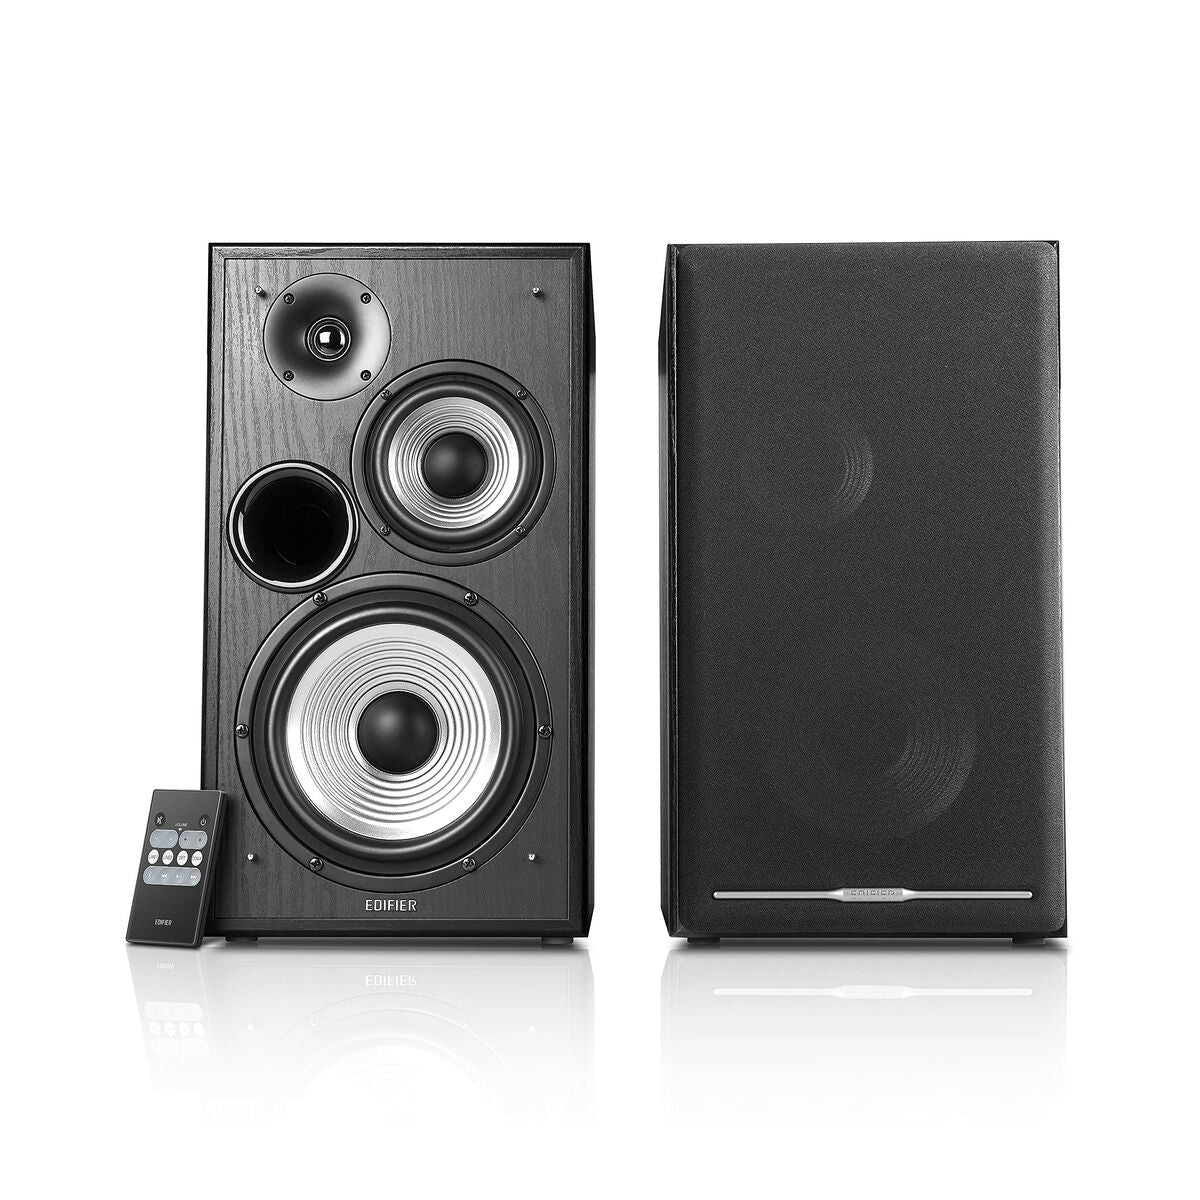 Speakers Edifier R2750DB, Edifier, Electronics, Audio and Hi-Fi equipment, speakers-edifier-r2750db, Brand_Edifier, category-reference-2609, category-reference-2637, category-reference-2882, category-reference-t-19653, category-reference-t-7441, category-reference-t-7442, cinema and television, computers / components, Condition_NEW, entertainment, music, Price_300 - 400, RiotNook